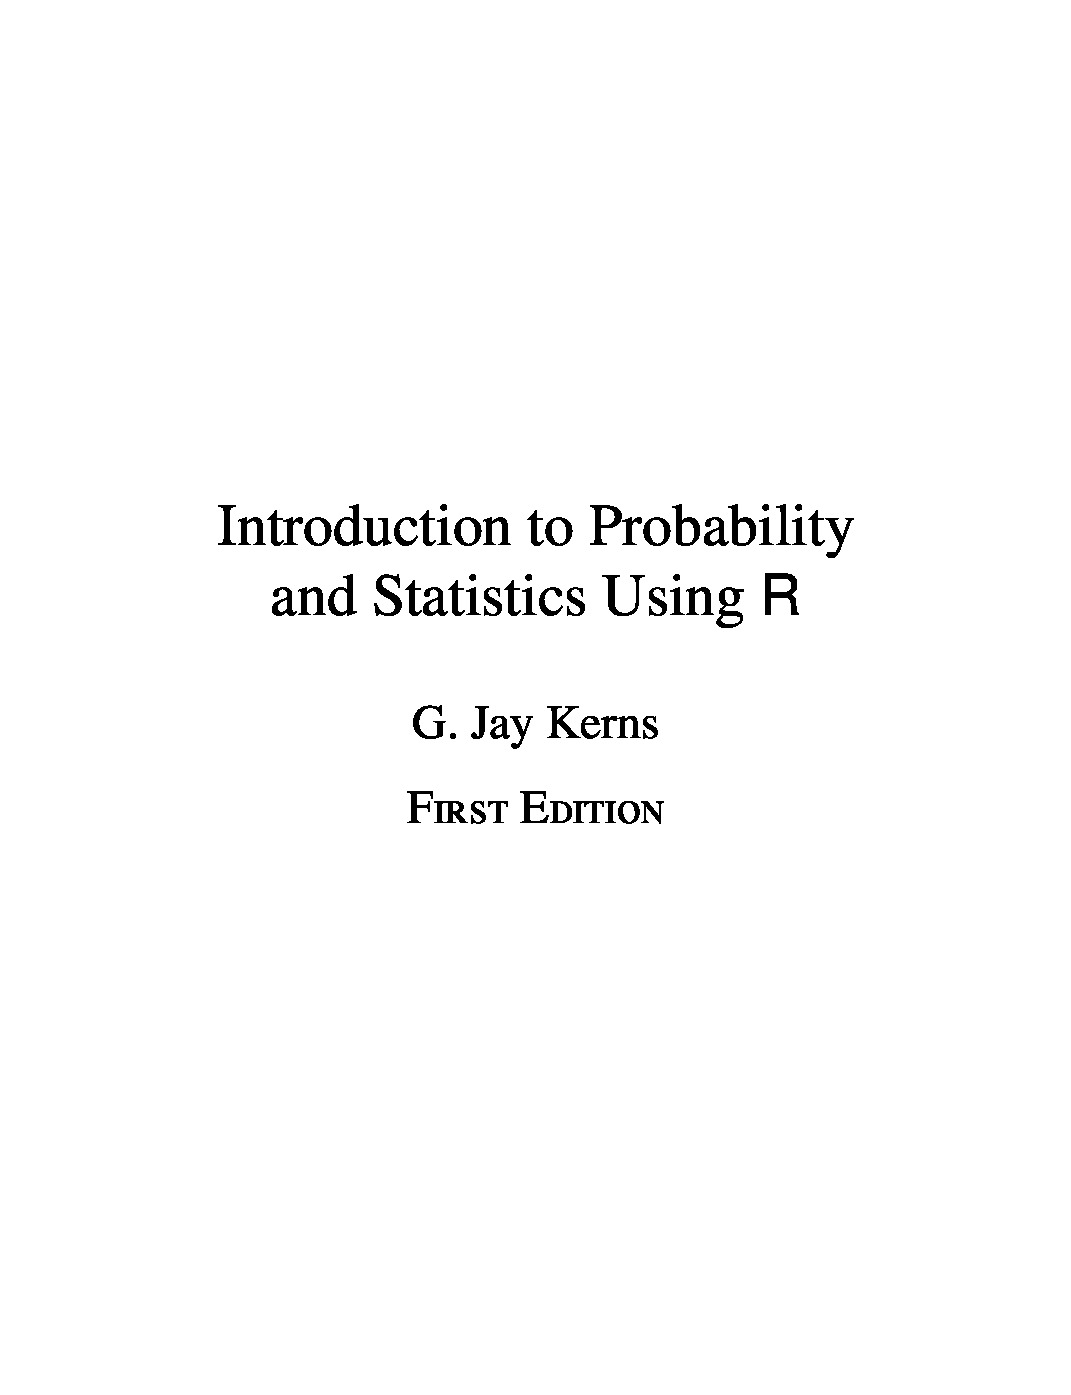 Intro_to_Prob_&_Stats_Using_R